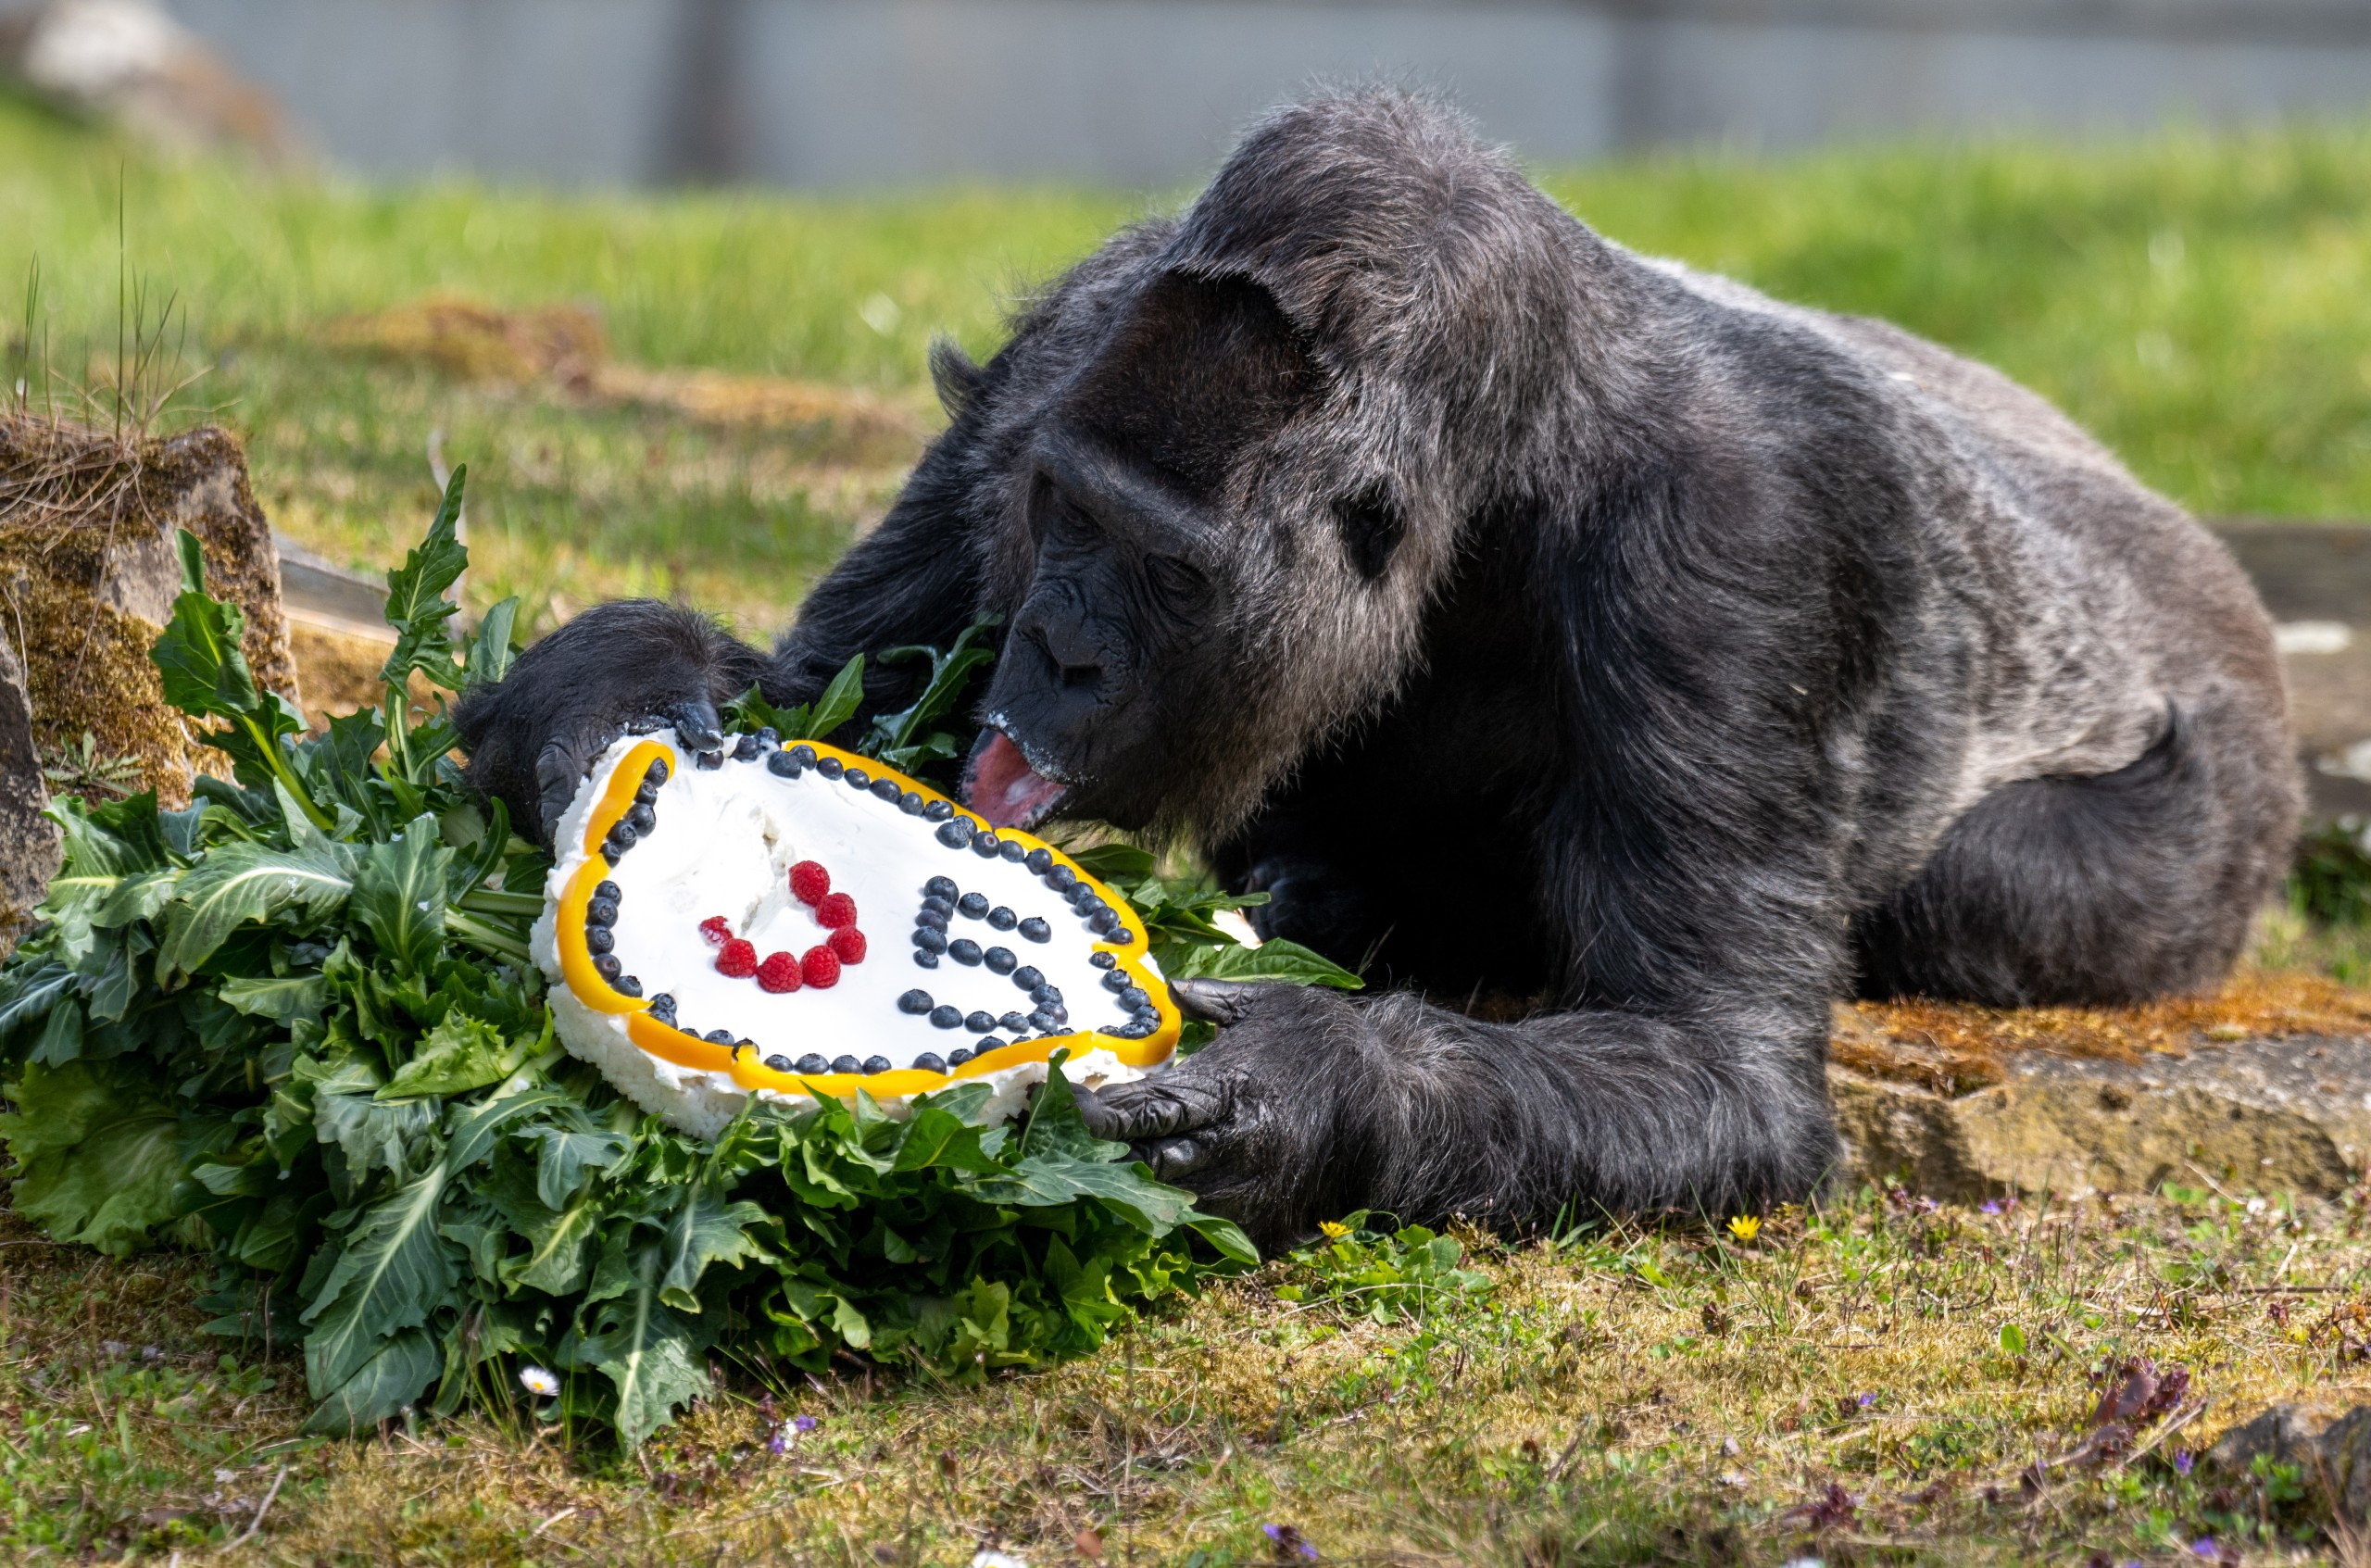 epa09887555 Gorilla Fatou eats the cake made of rice and fruit served to her on the occasion of her 65th birthday at the Zoological Garden Berlin, in Berlin, Germany, 13 April 2022. Gorilla lady Fatou will turn 65 on 13 April 2022, making her the oldest gorilla in the world.  EPA/CONSTANTIN ZINN